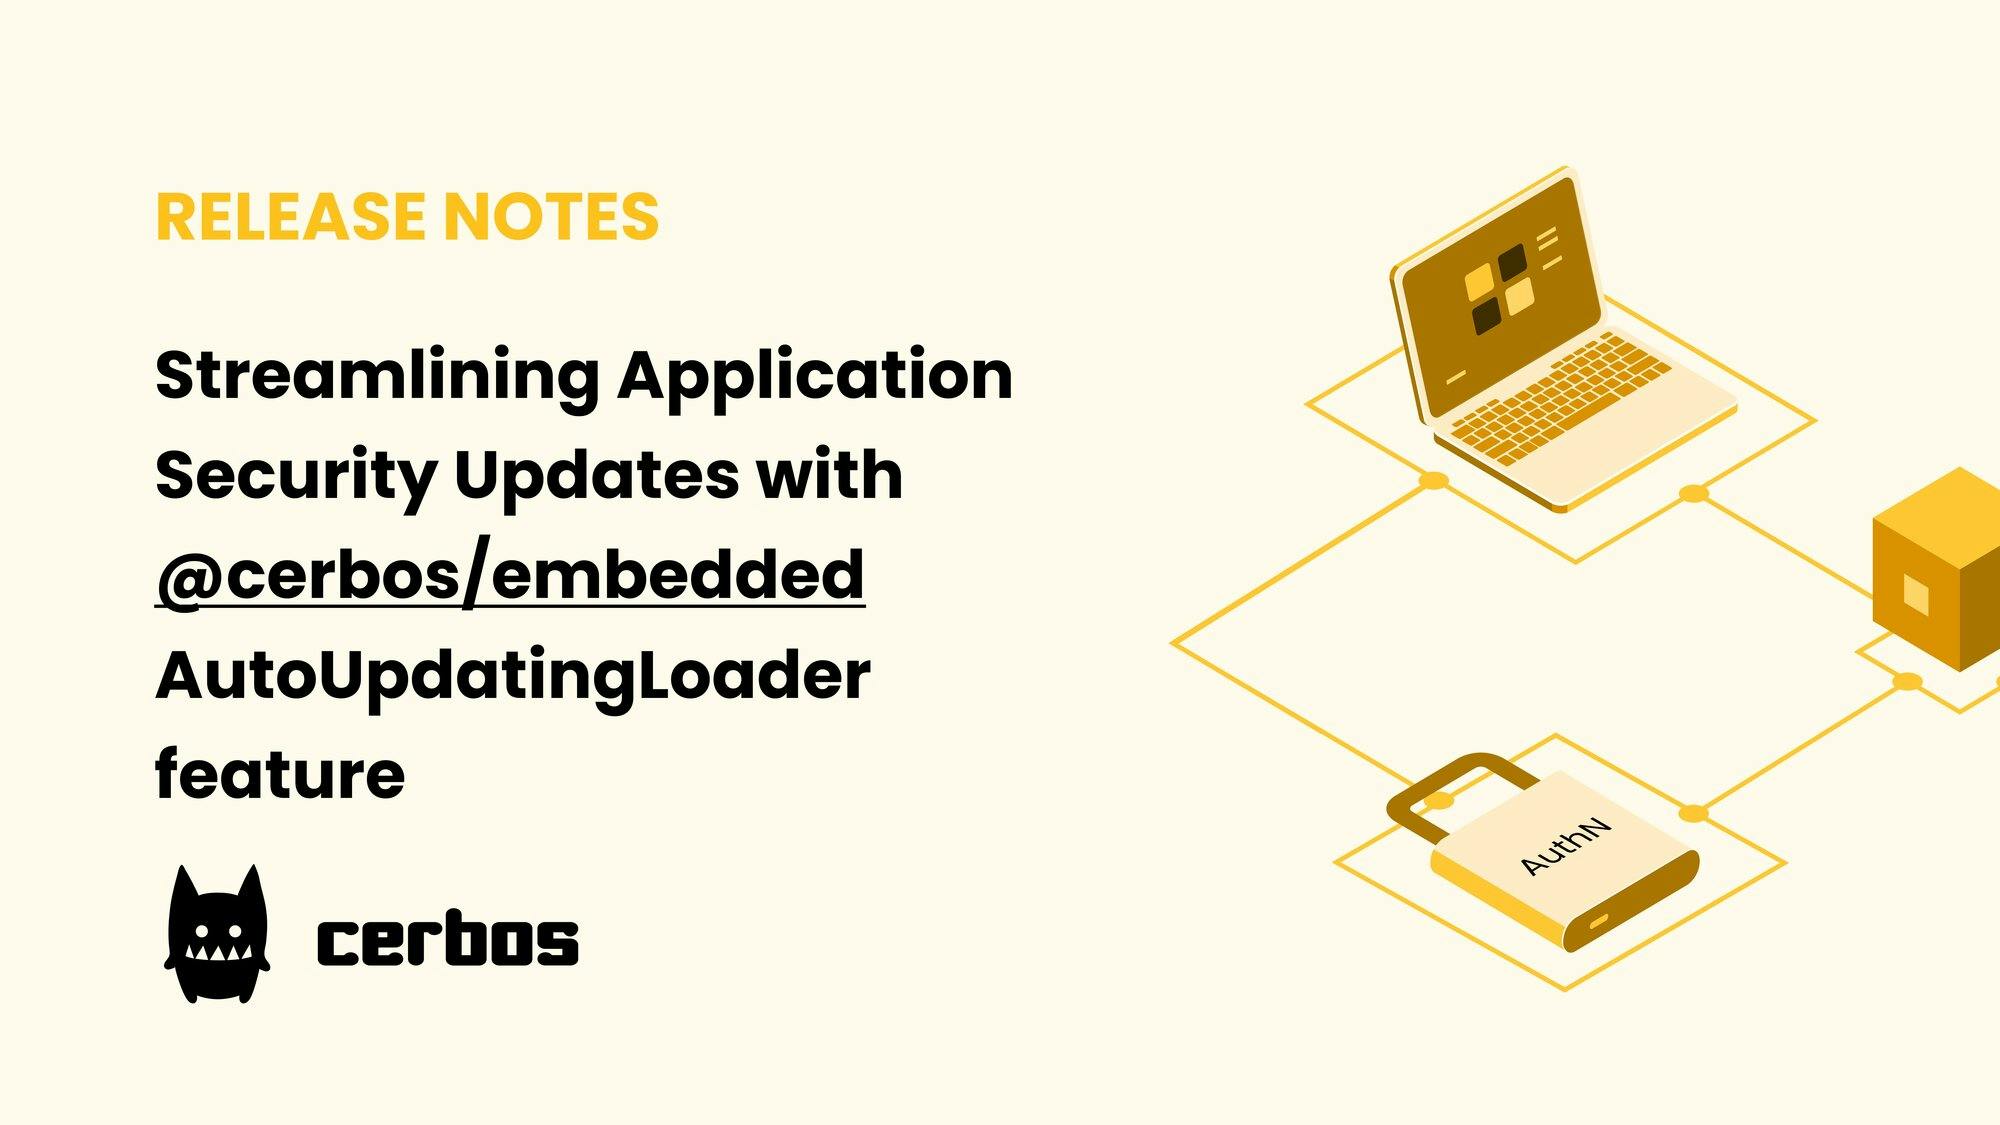 Streamlining Application Security Updates with @cerbos/embedded AutoUpdatingLoader feature